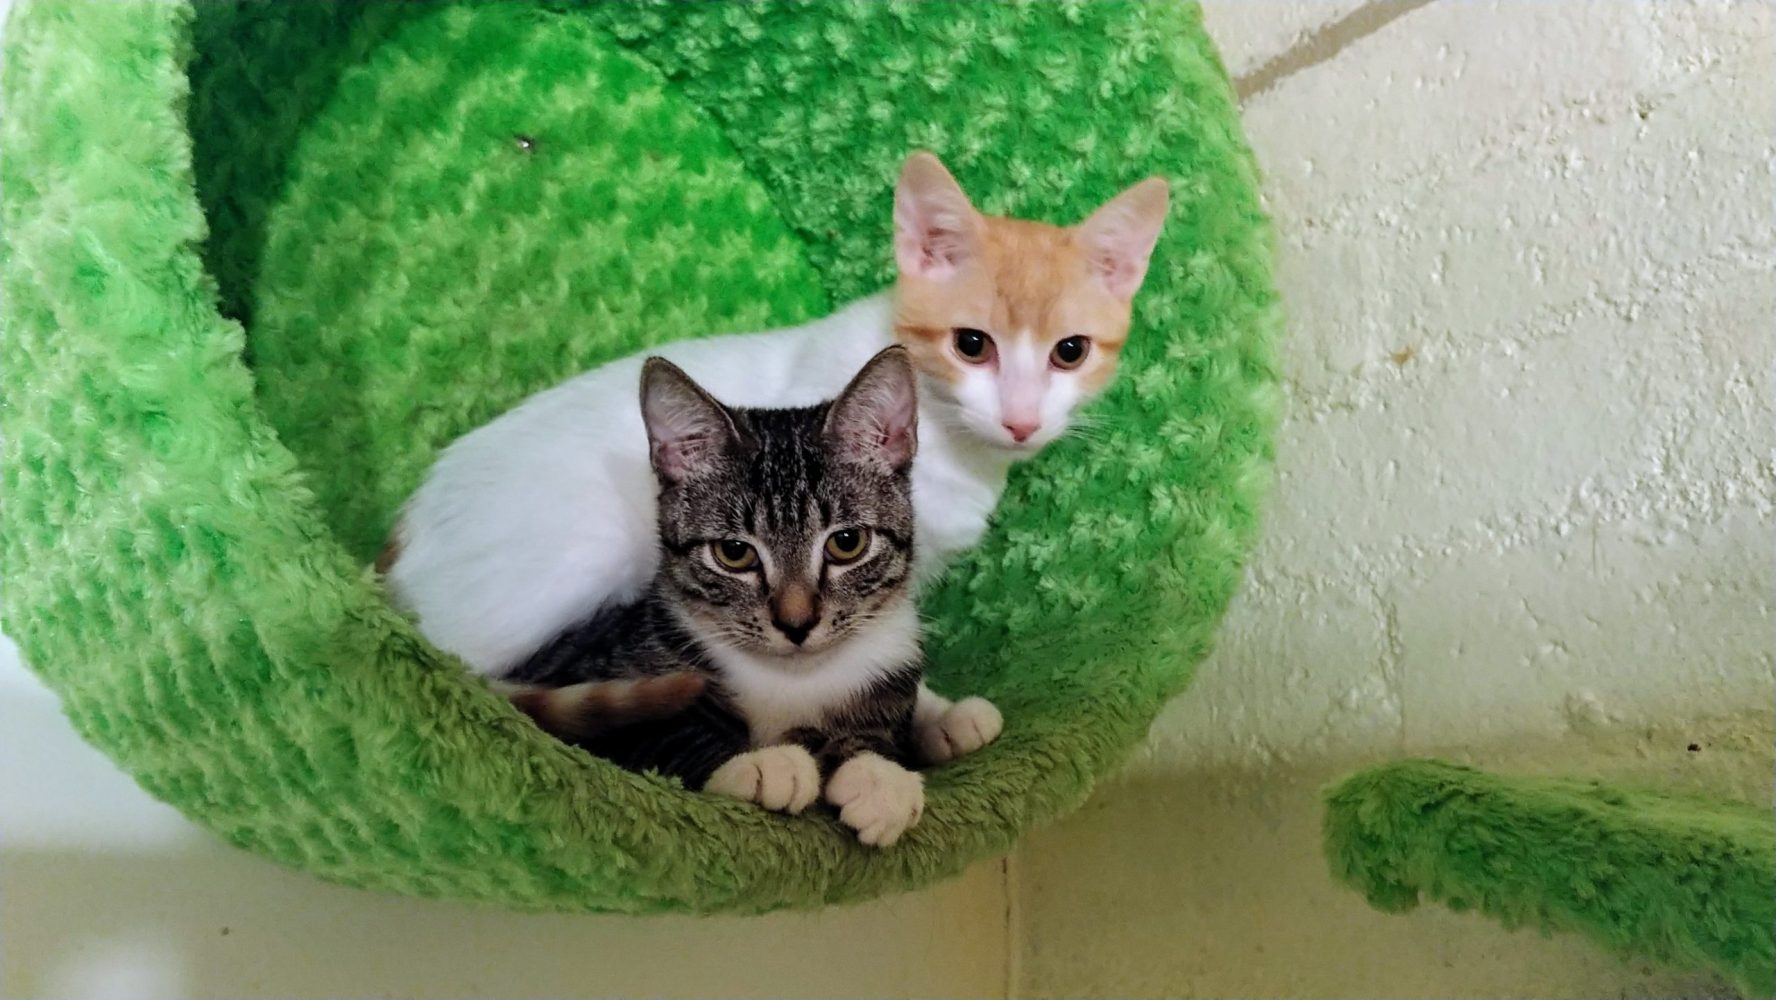 Meet Ollie and Lilo at The Cat Cafe